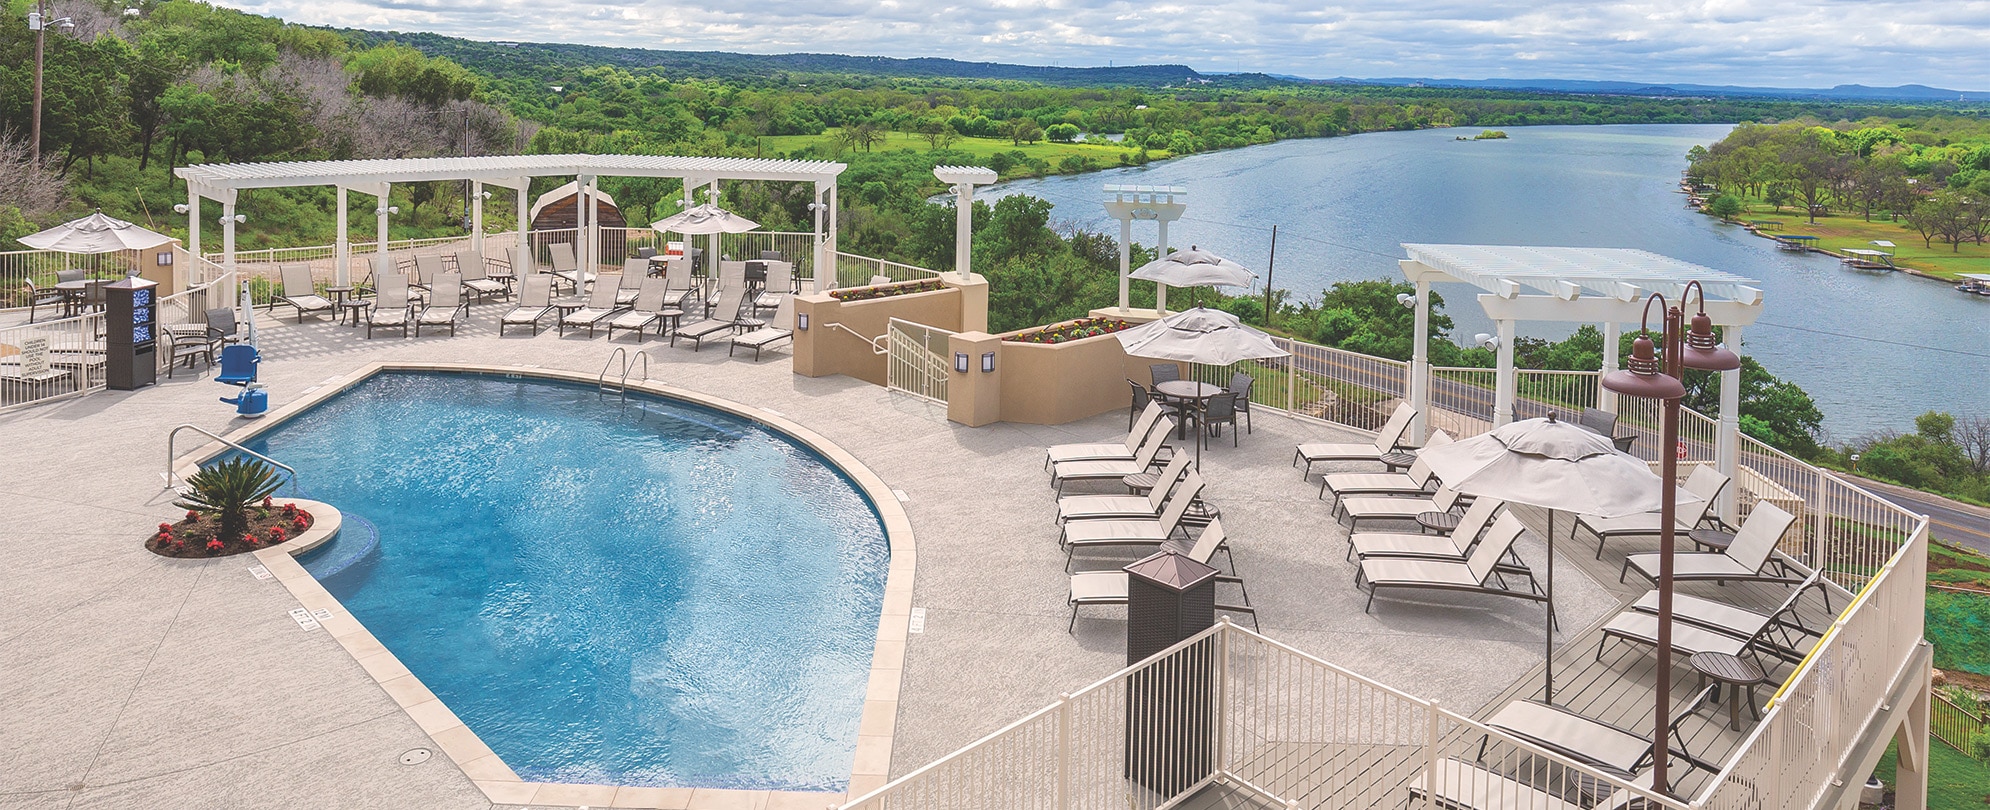 A pool surrounded by chairs overlooking a large body of water at WorldMark Marble Falls.